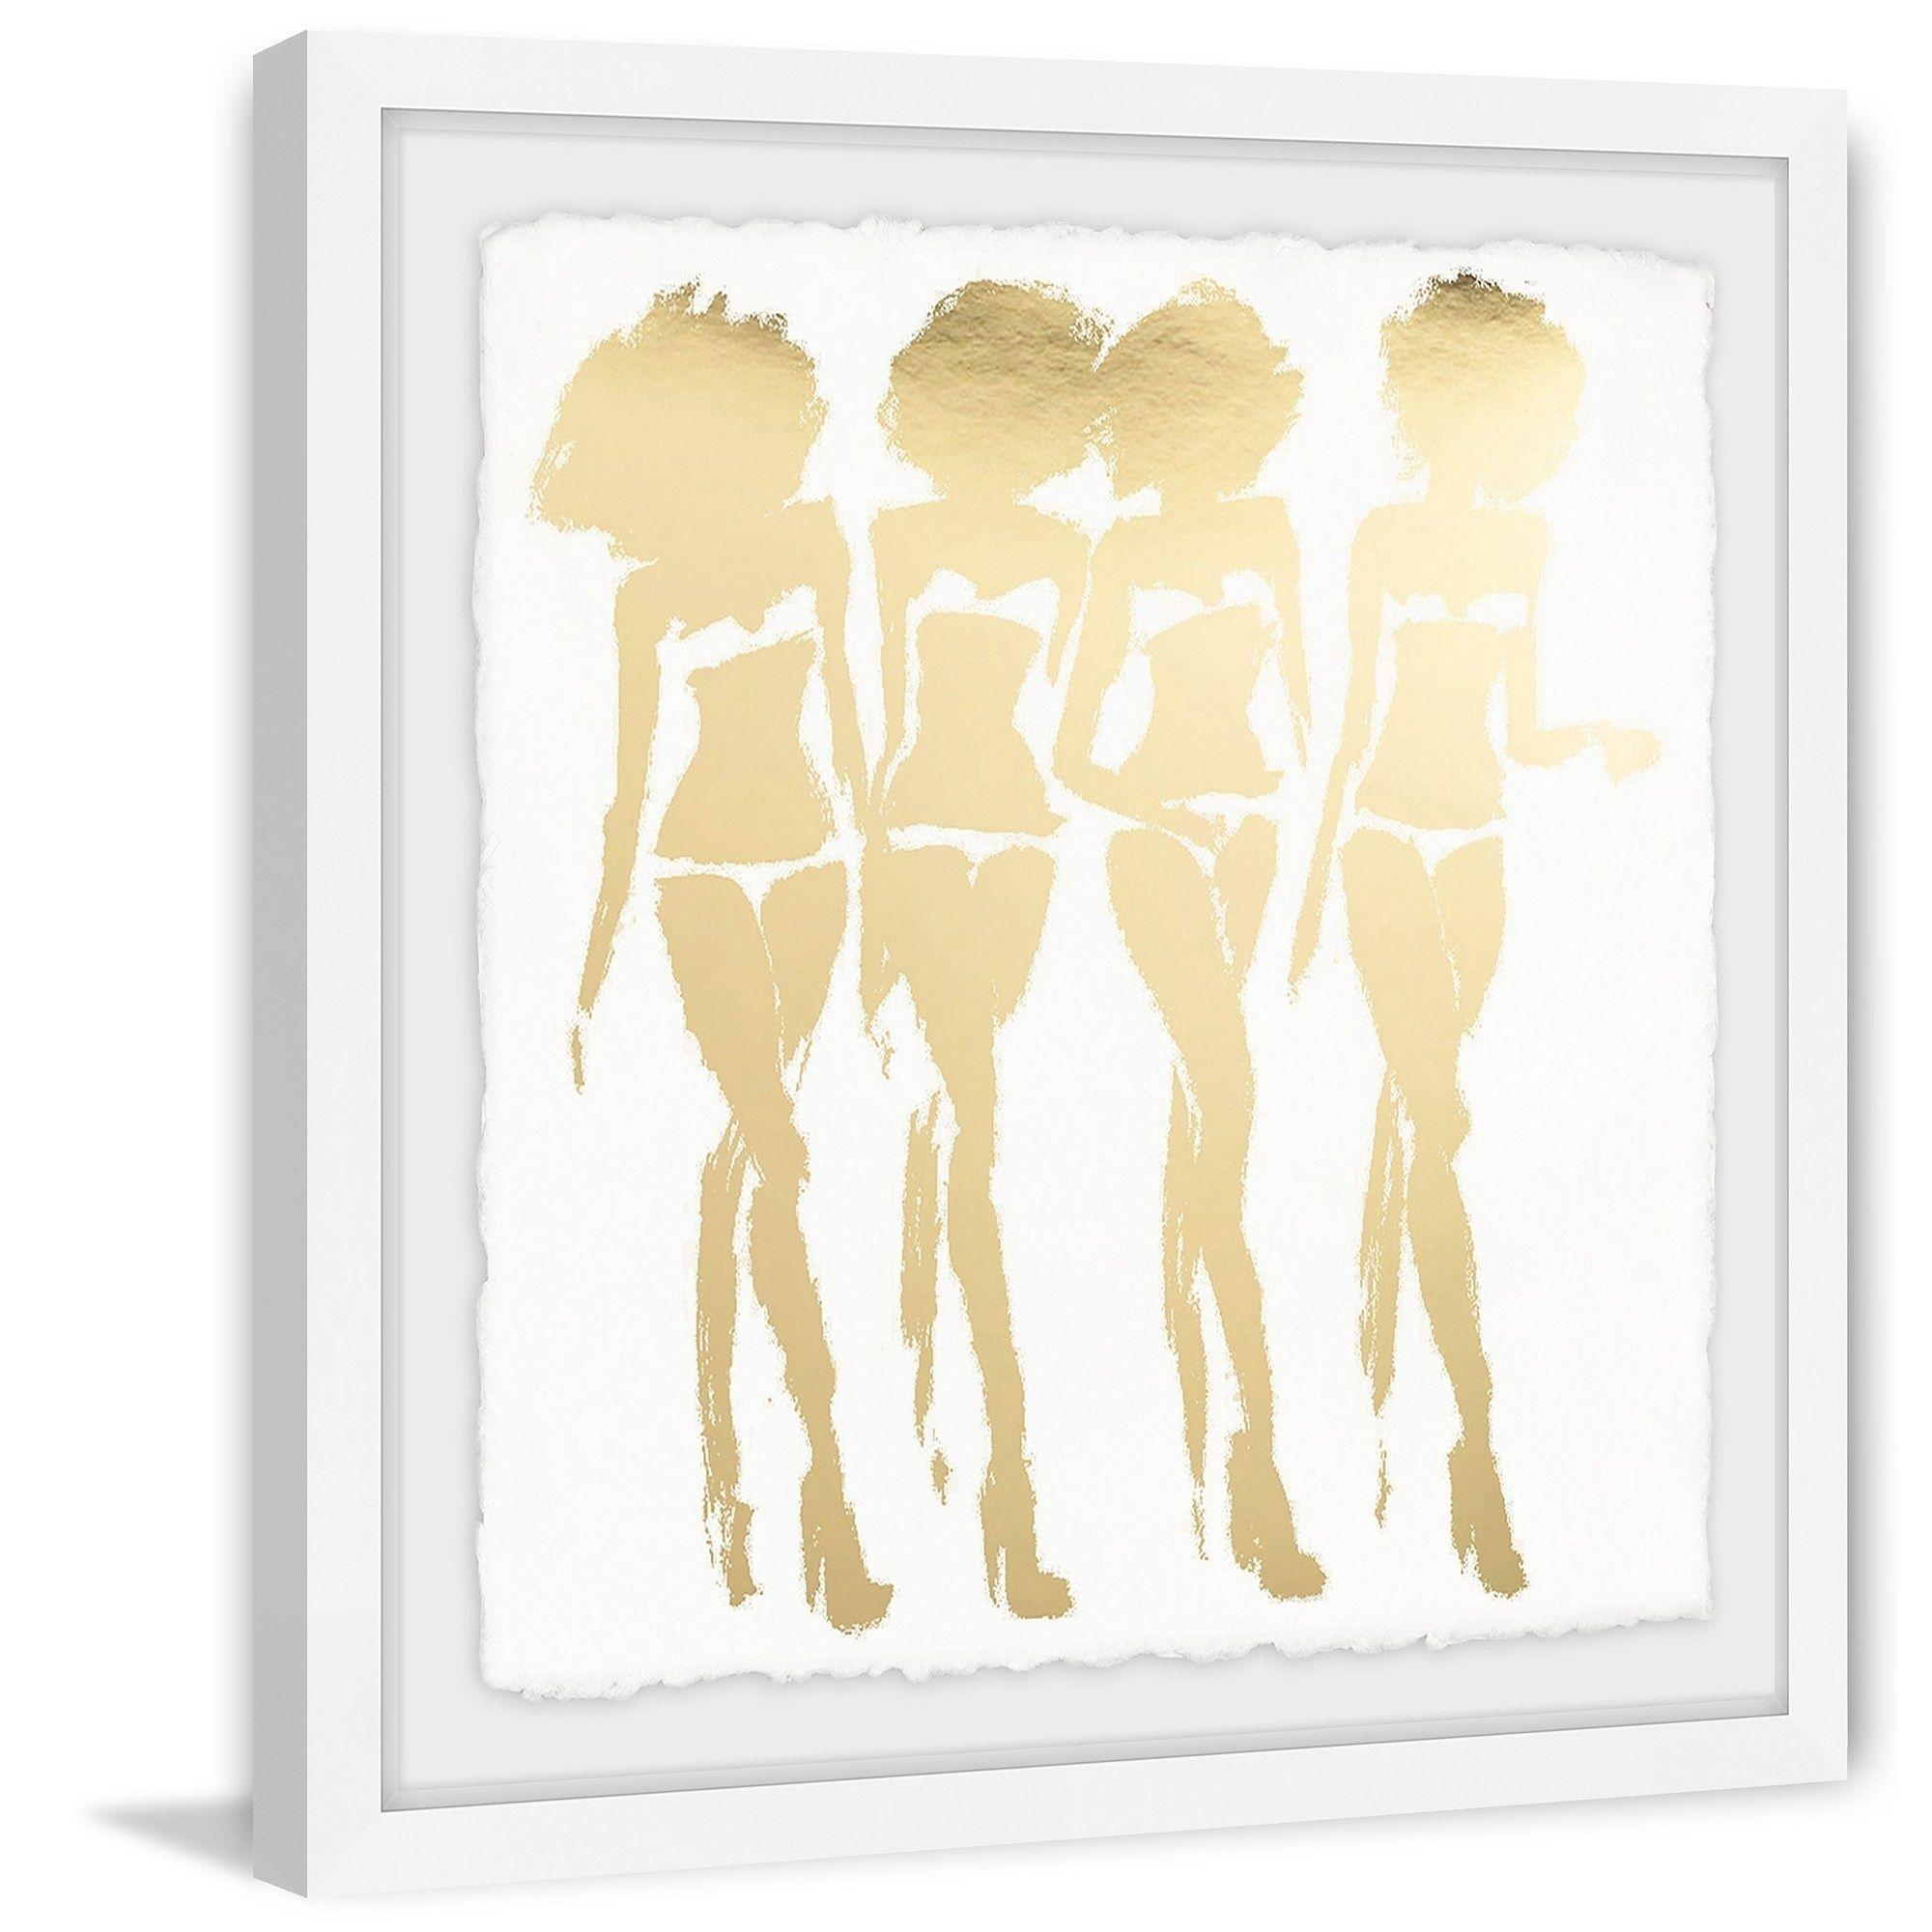 Multi Colored Hands Basketball Logo - Shop Disco Glam II' Framed Painting Print - Multi-color - Free ...